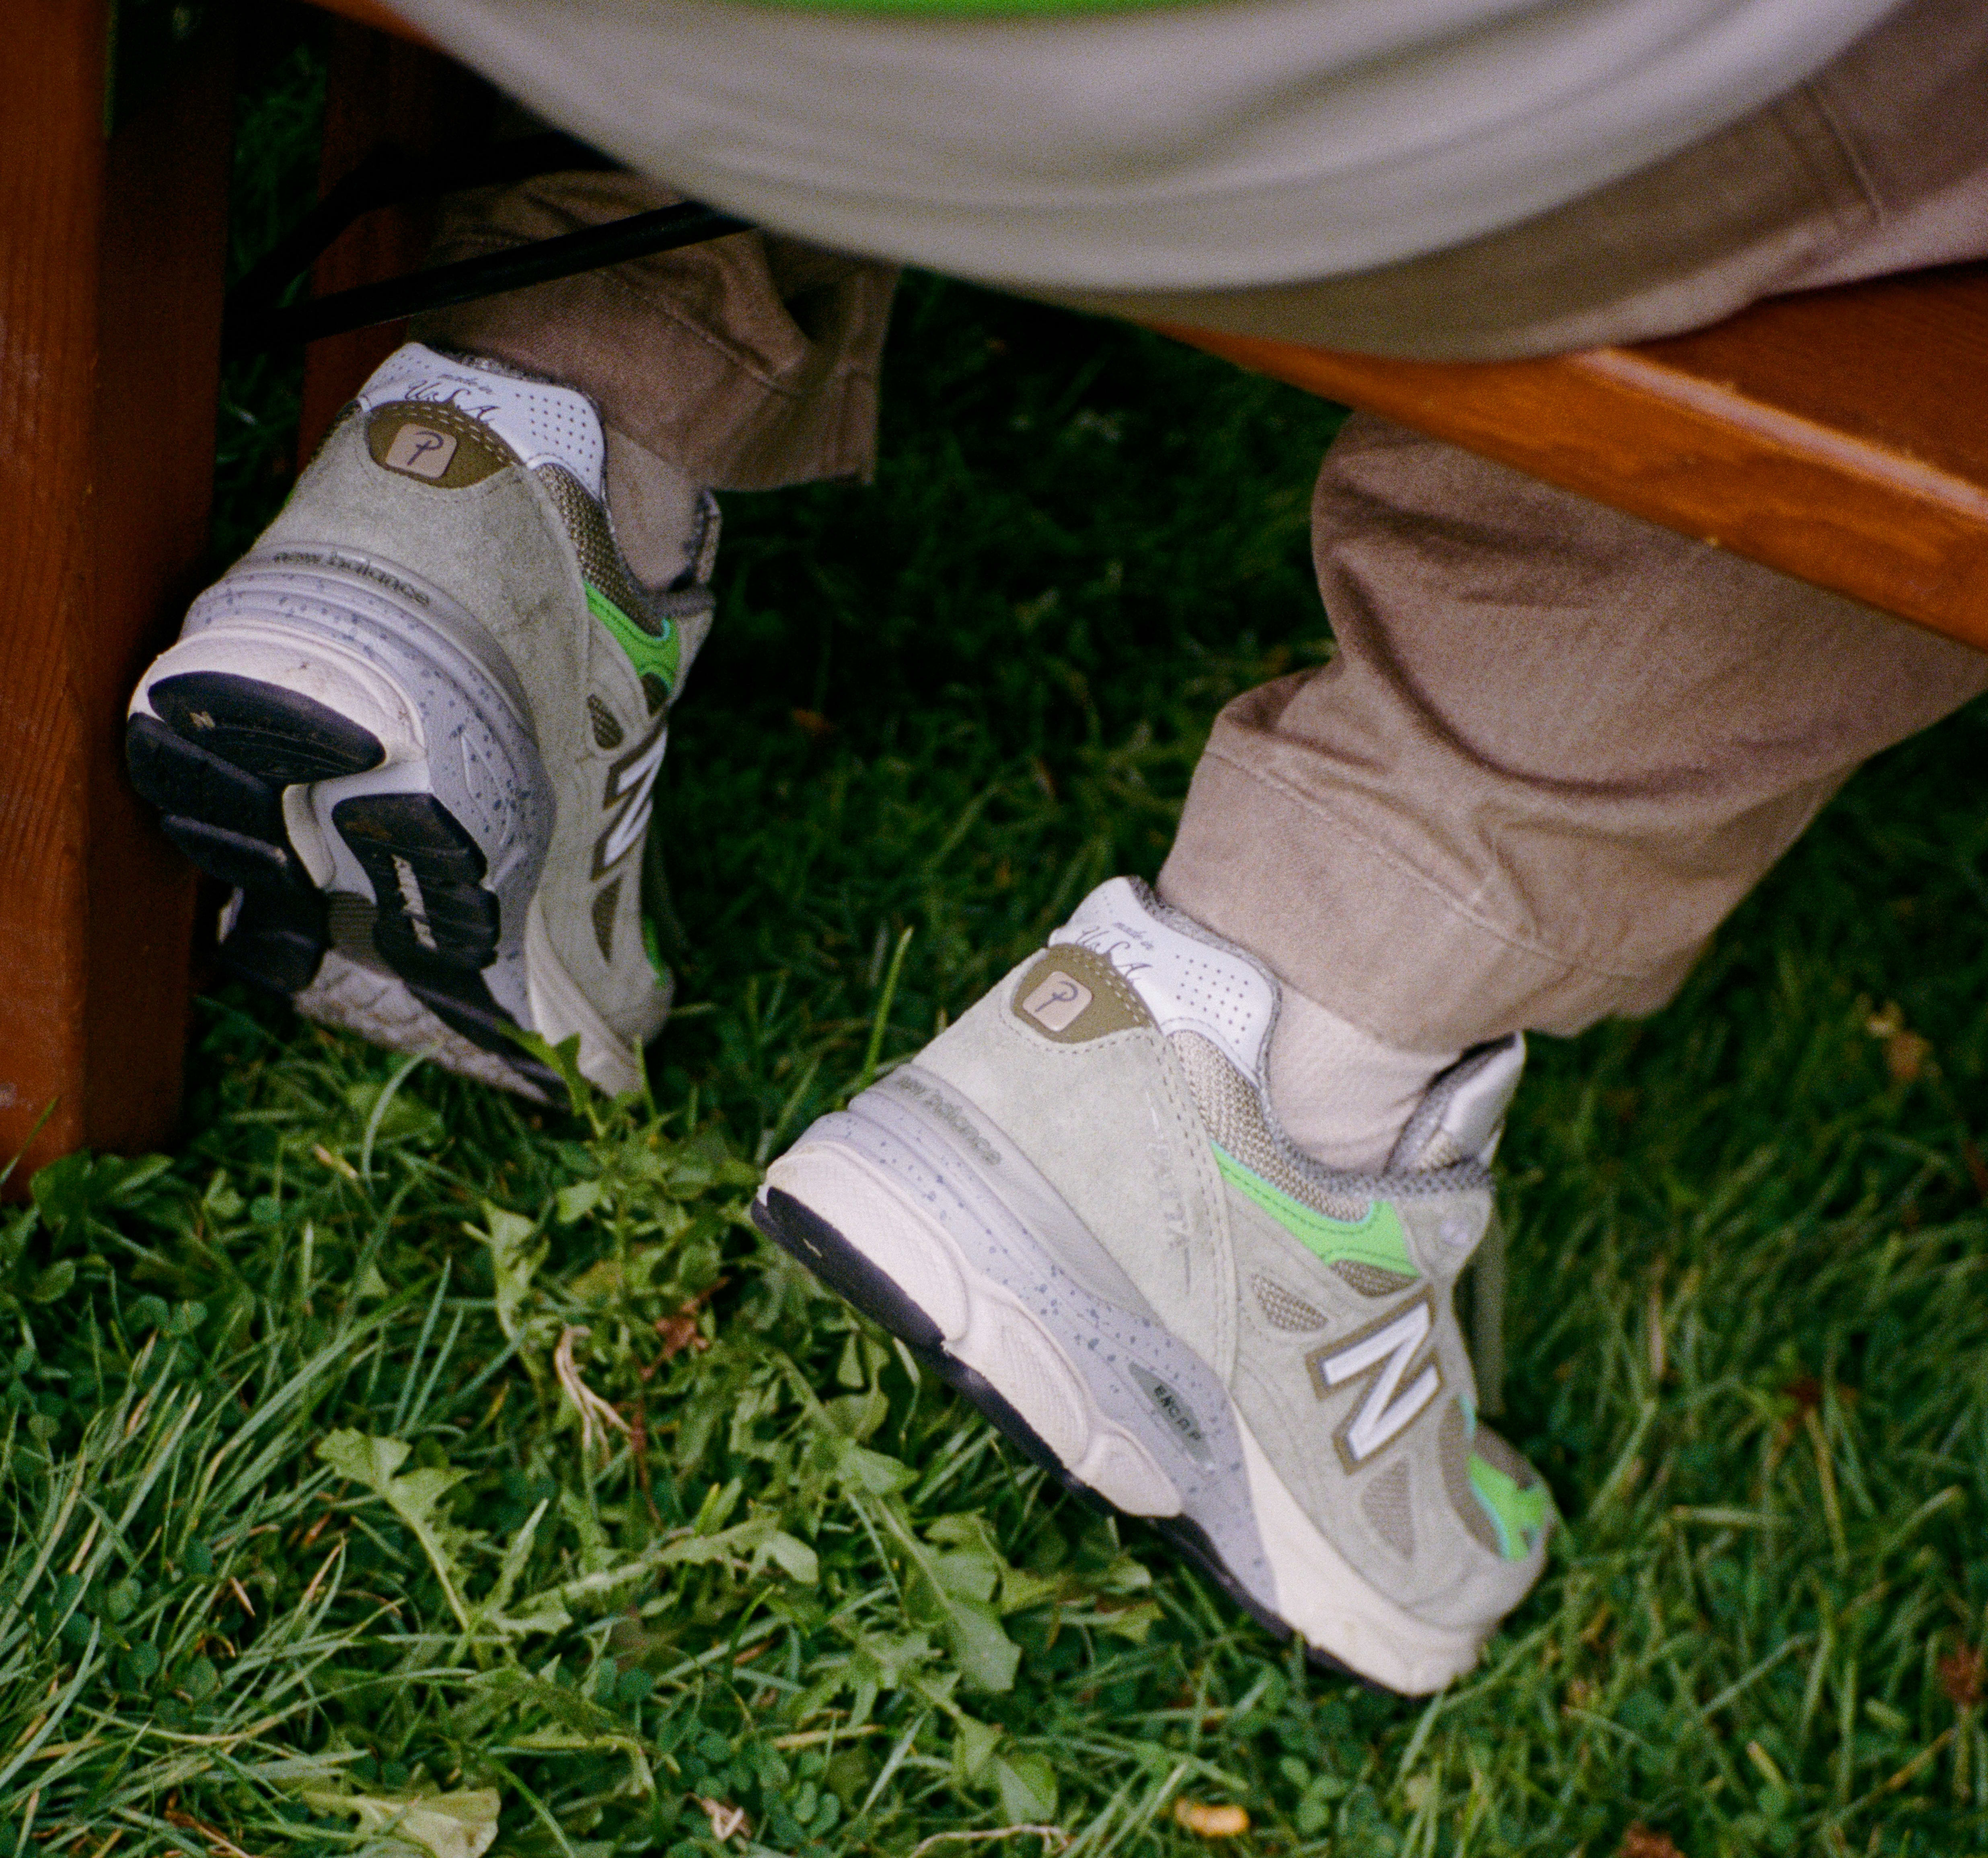 Patta x New Balance 990v3 Release Date September 2022 | Sole Collector